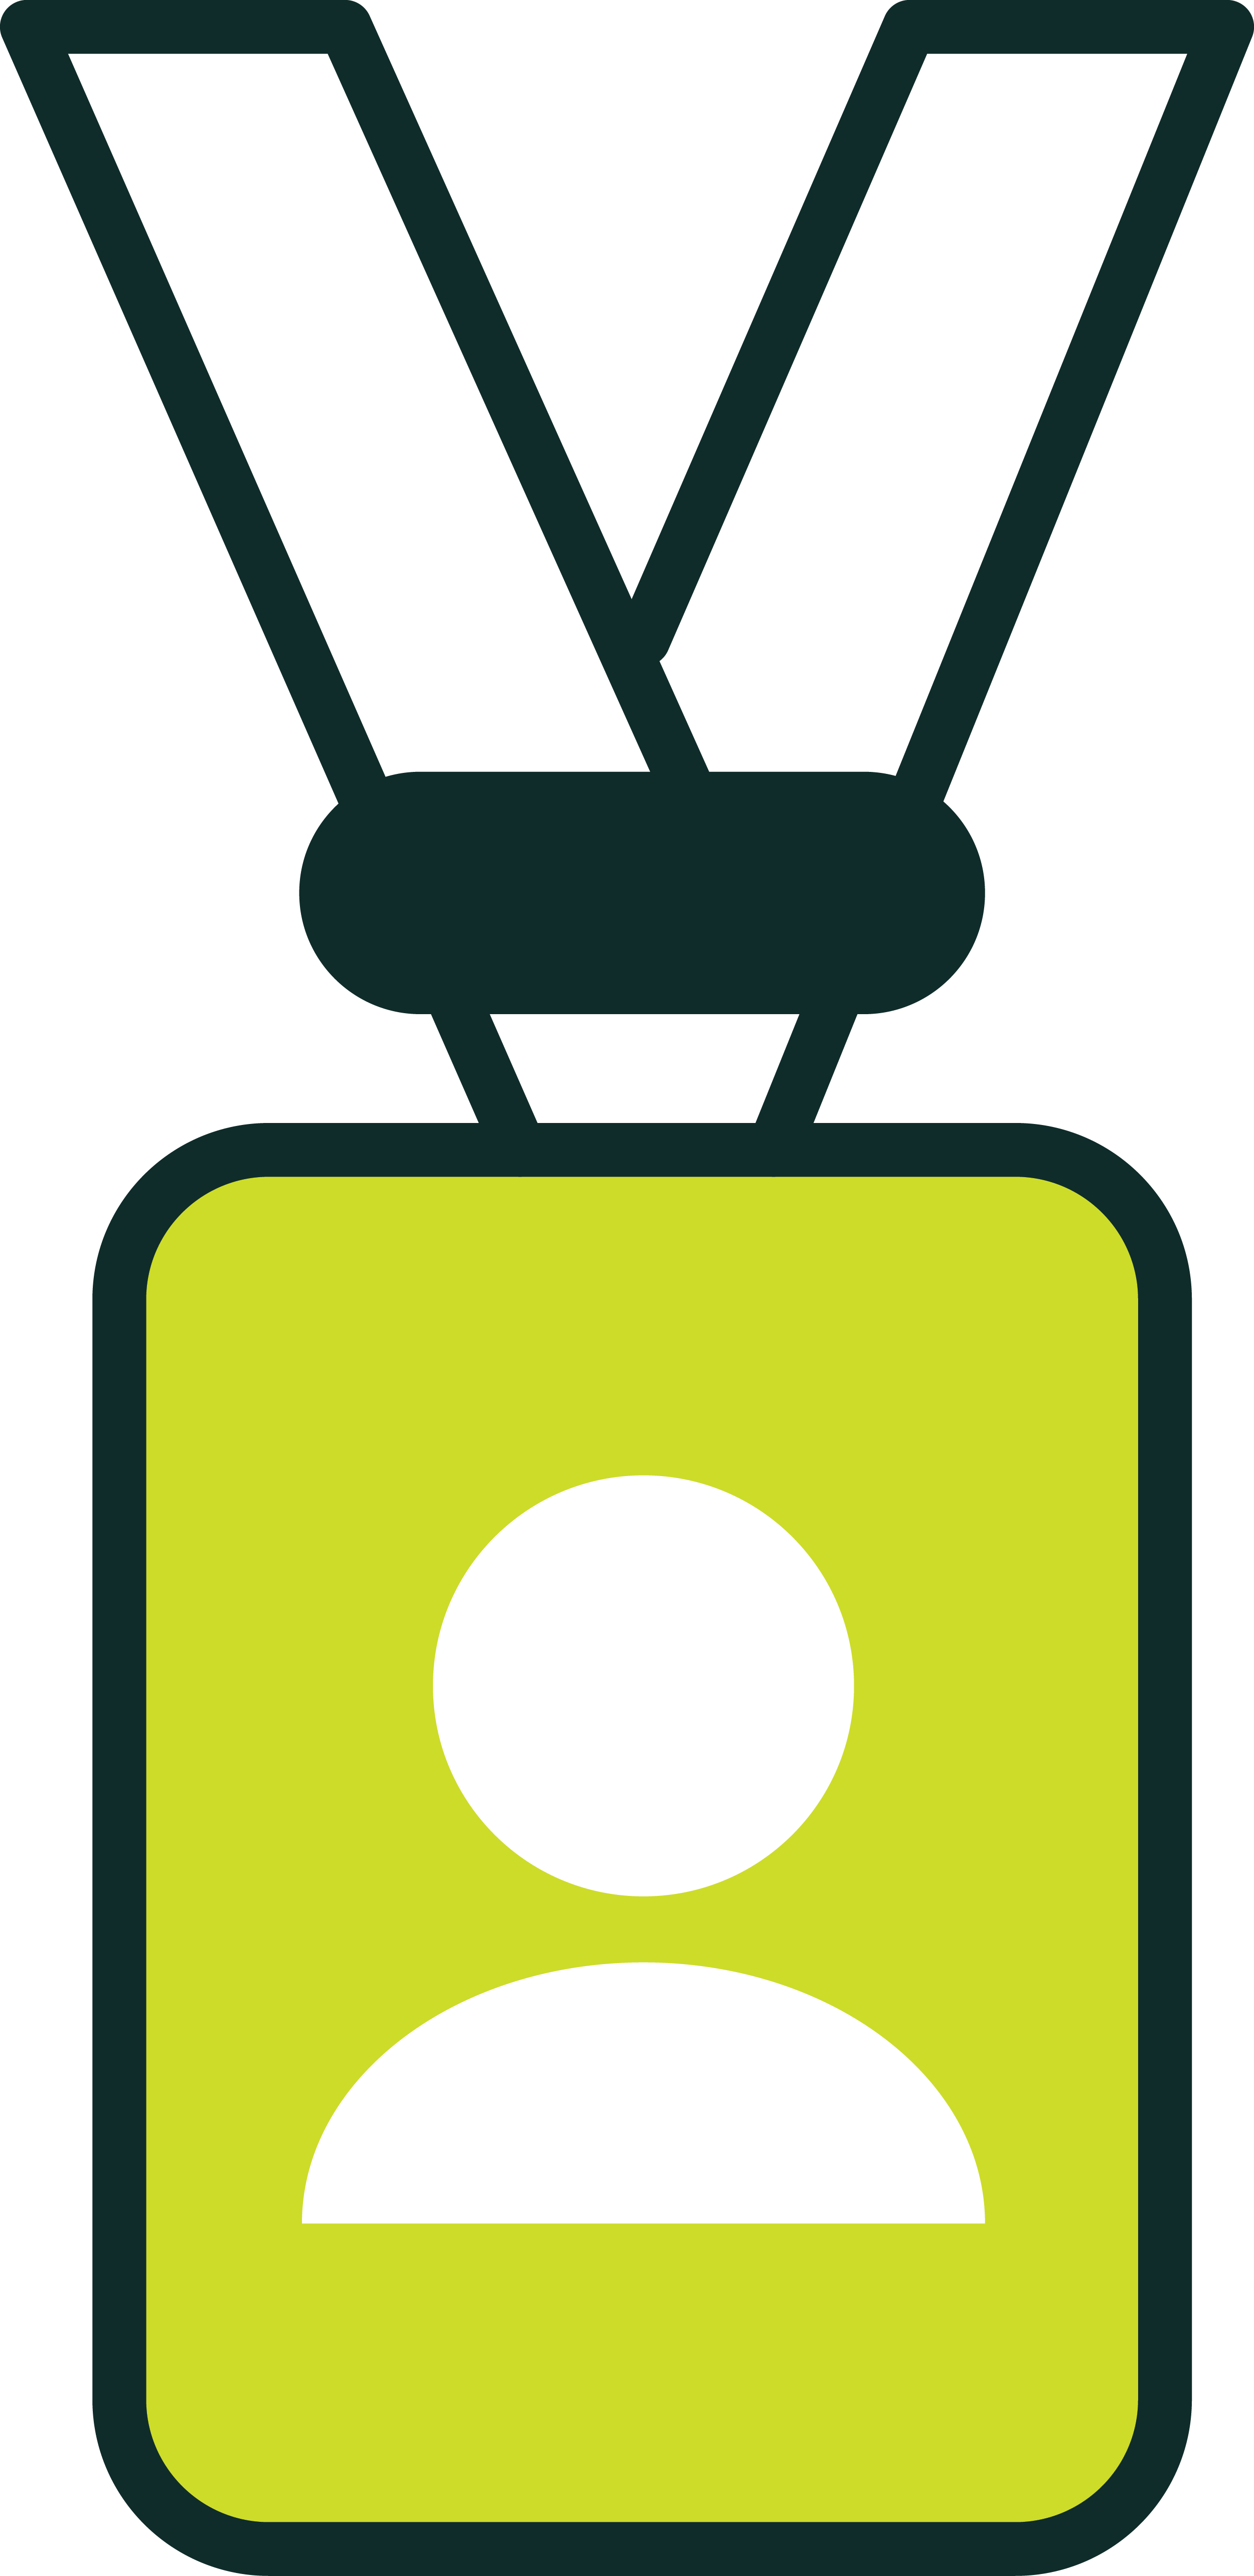 a yellow tv with a black and white image of a person on it.